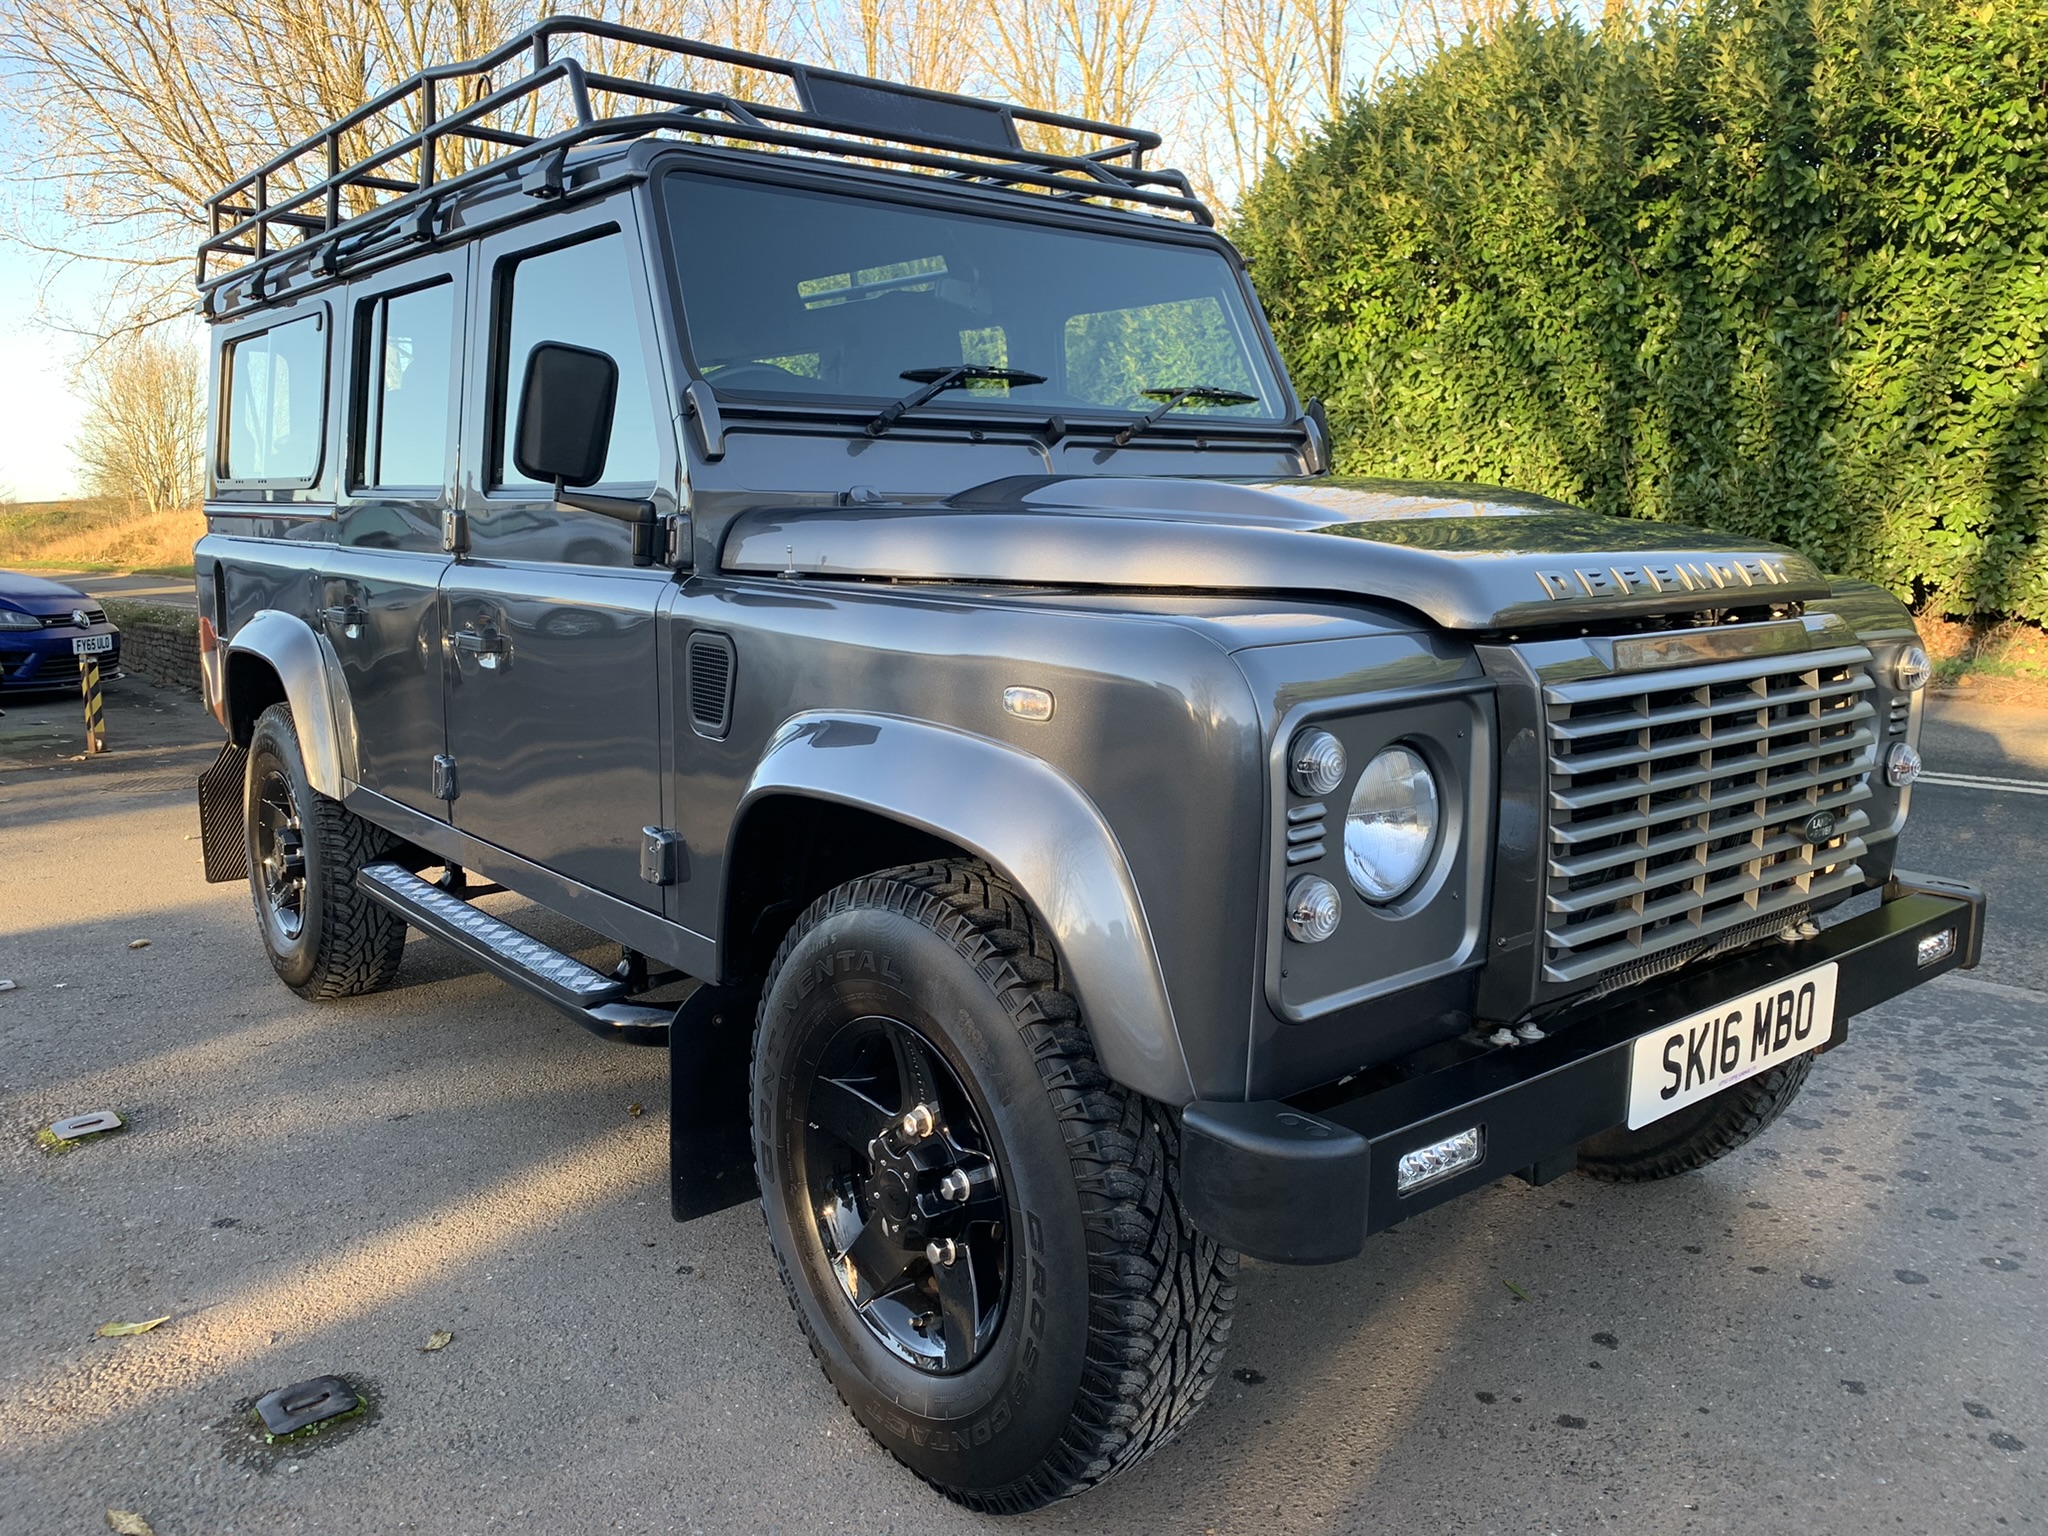 Used Land Rover Defender 110 XS TD 4x4 car for sale in Exeter, Devon